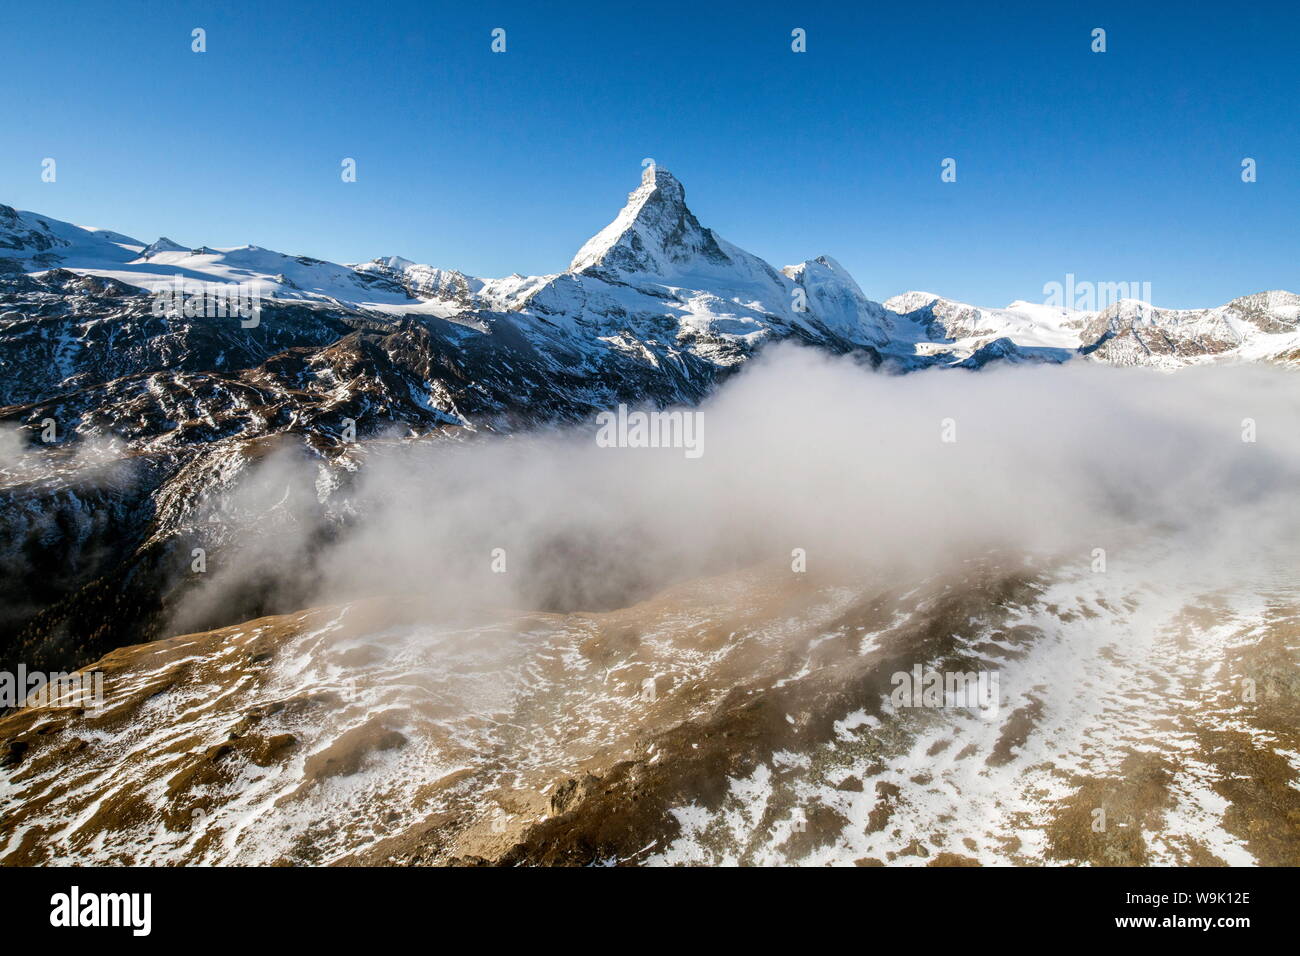 The unique shape of the Matterhorn sorrounded by its mountain range covered in snow, Swiss Canton of Valais, Swiss Alps, Switzerland, Europe Stock Photo